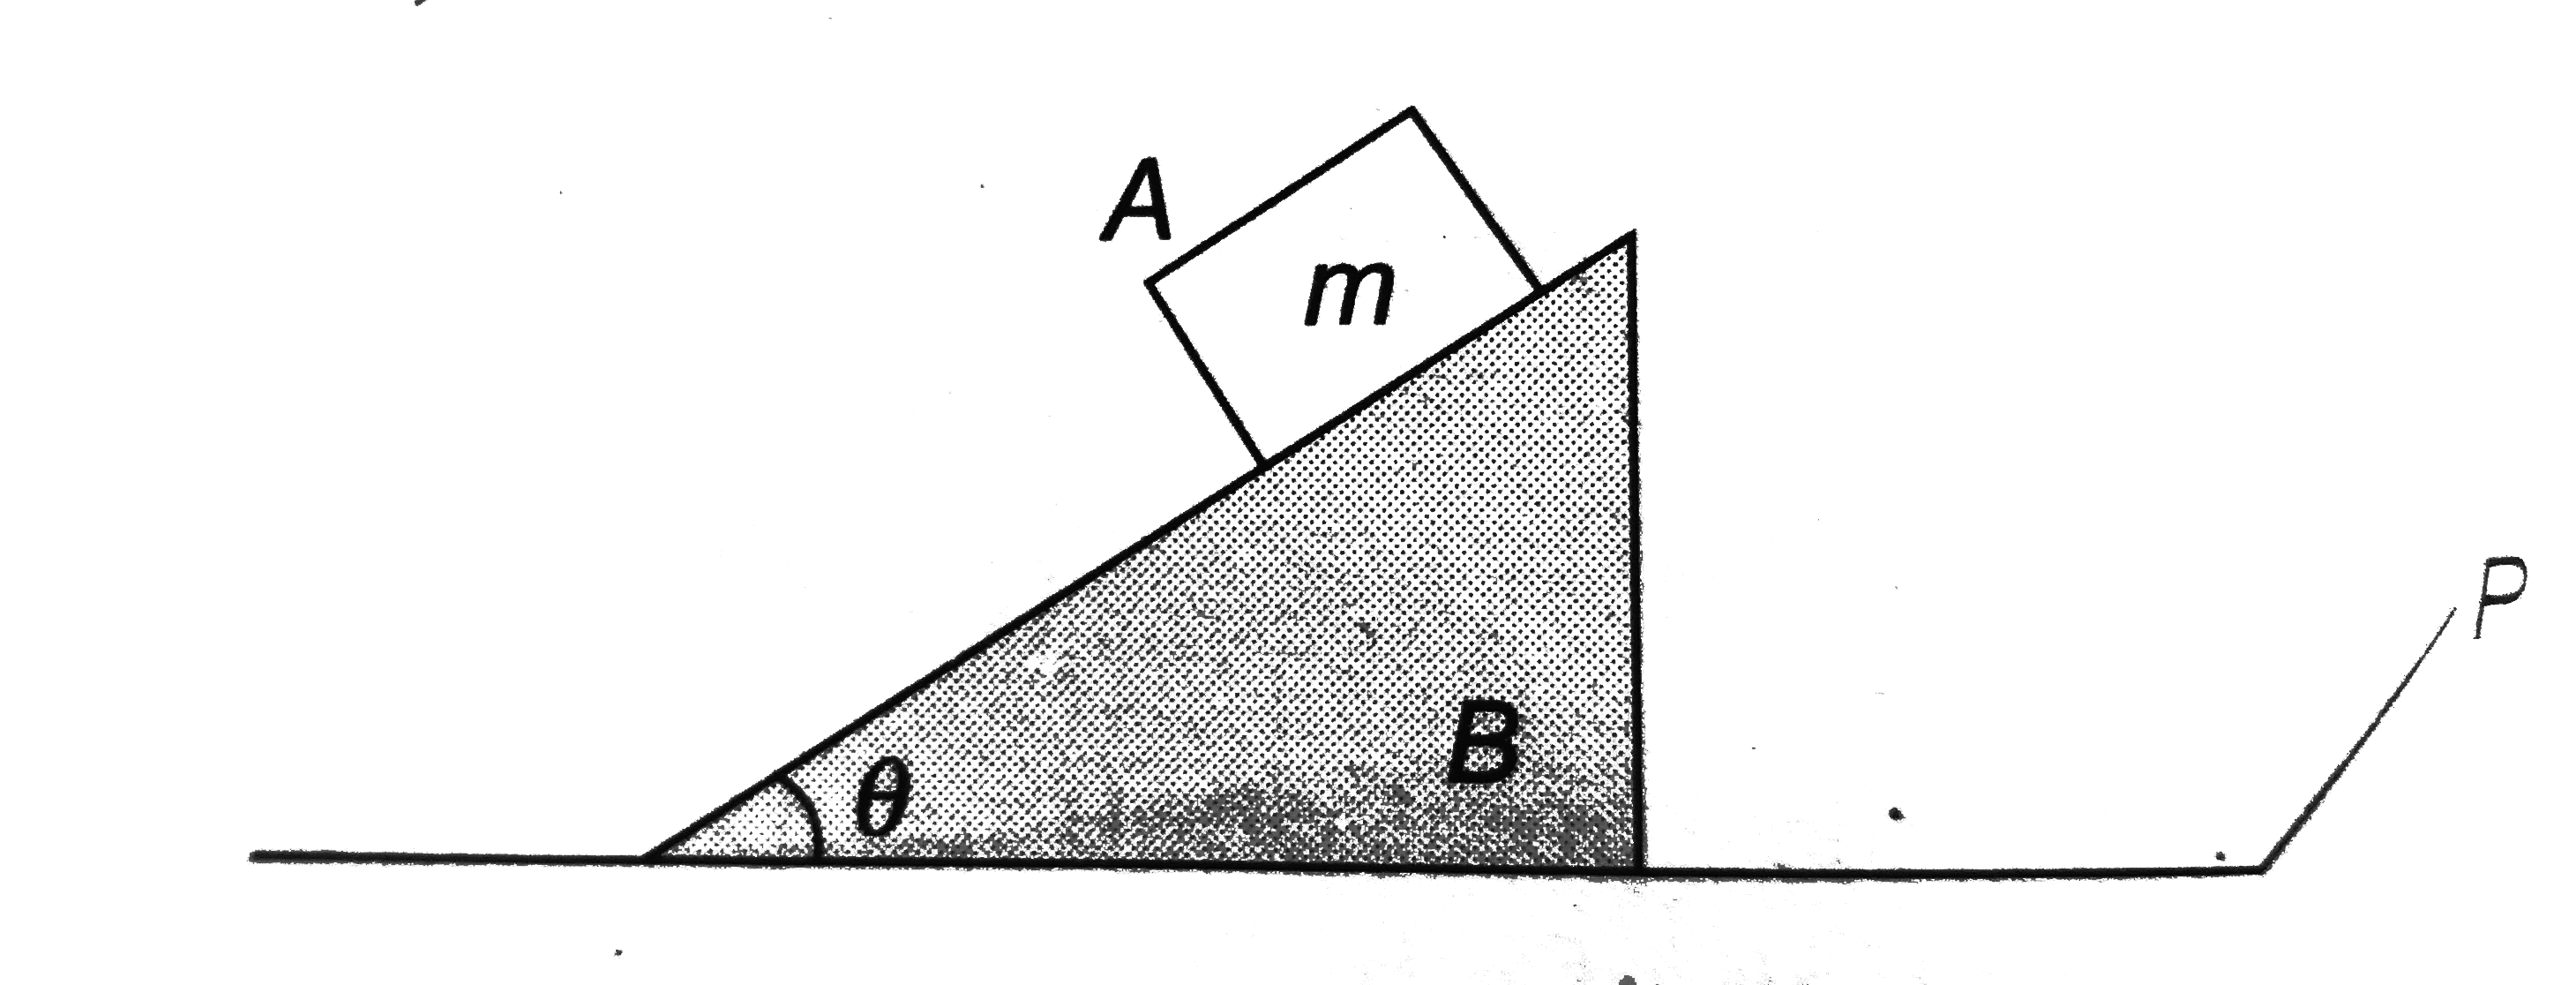 In the figure shown 'p' is a plate on which a wedge B is placed and on B a block A of mass m m is placed. The plate isi suddenly removed and system of B and A is allowed to fall under gravity. Neglecting any force due to air on A and B , the normal force on A due to B is